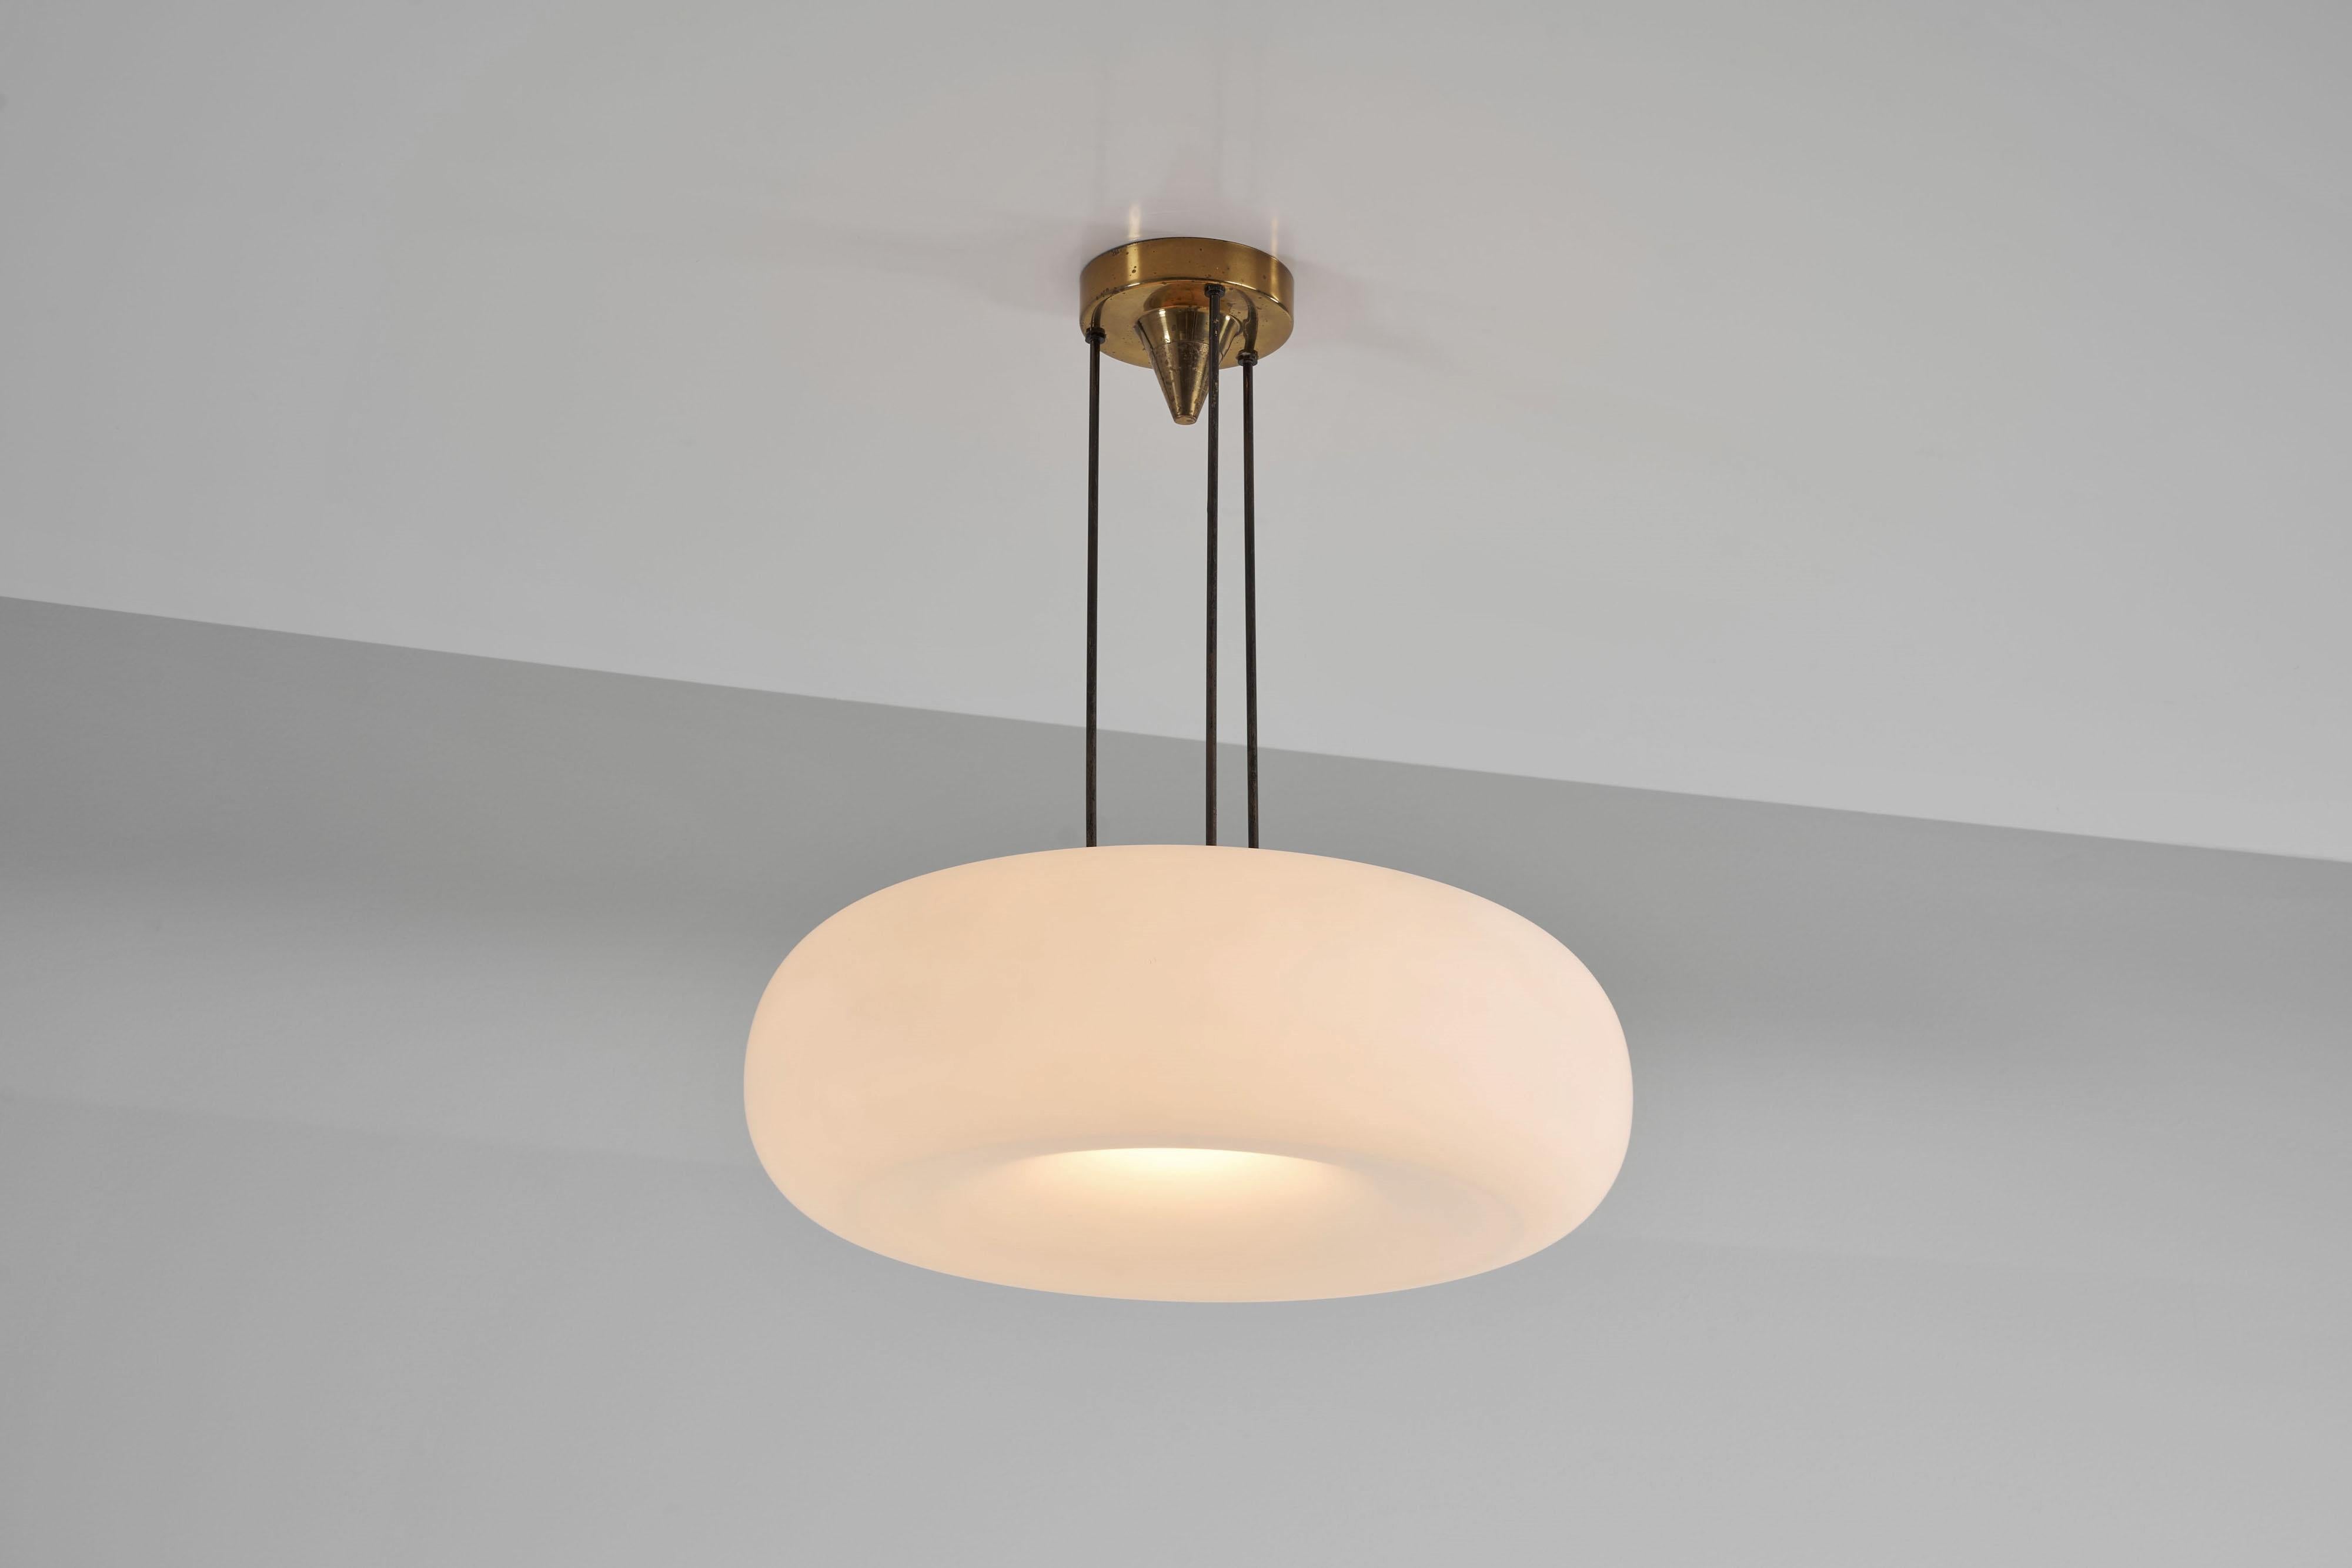 Cold-Painted Max Ingrand 2356 ceiling light Fontana Arte Italy 1967